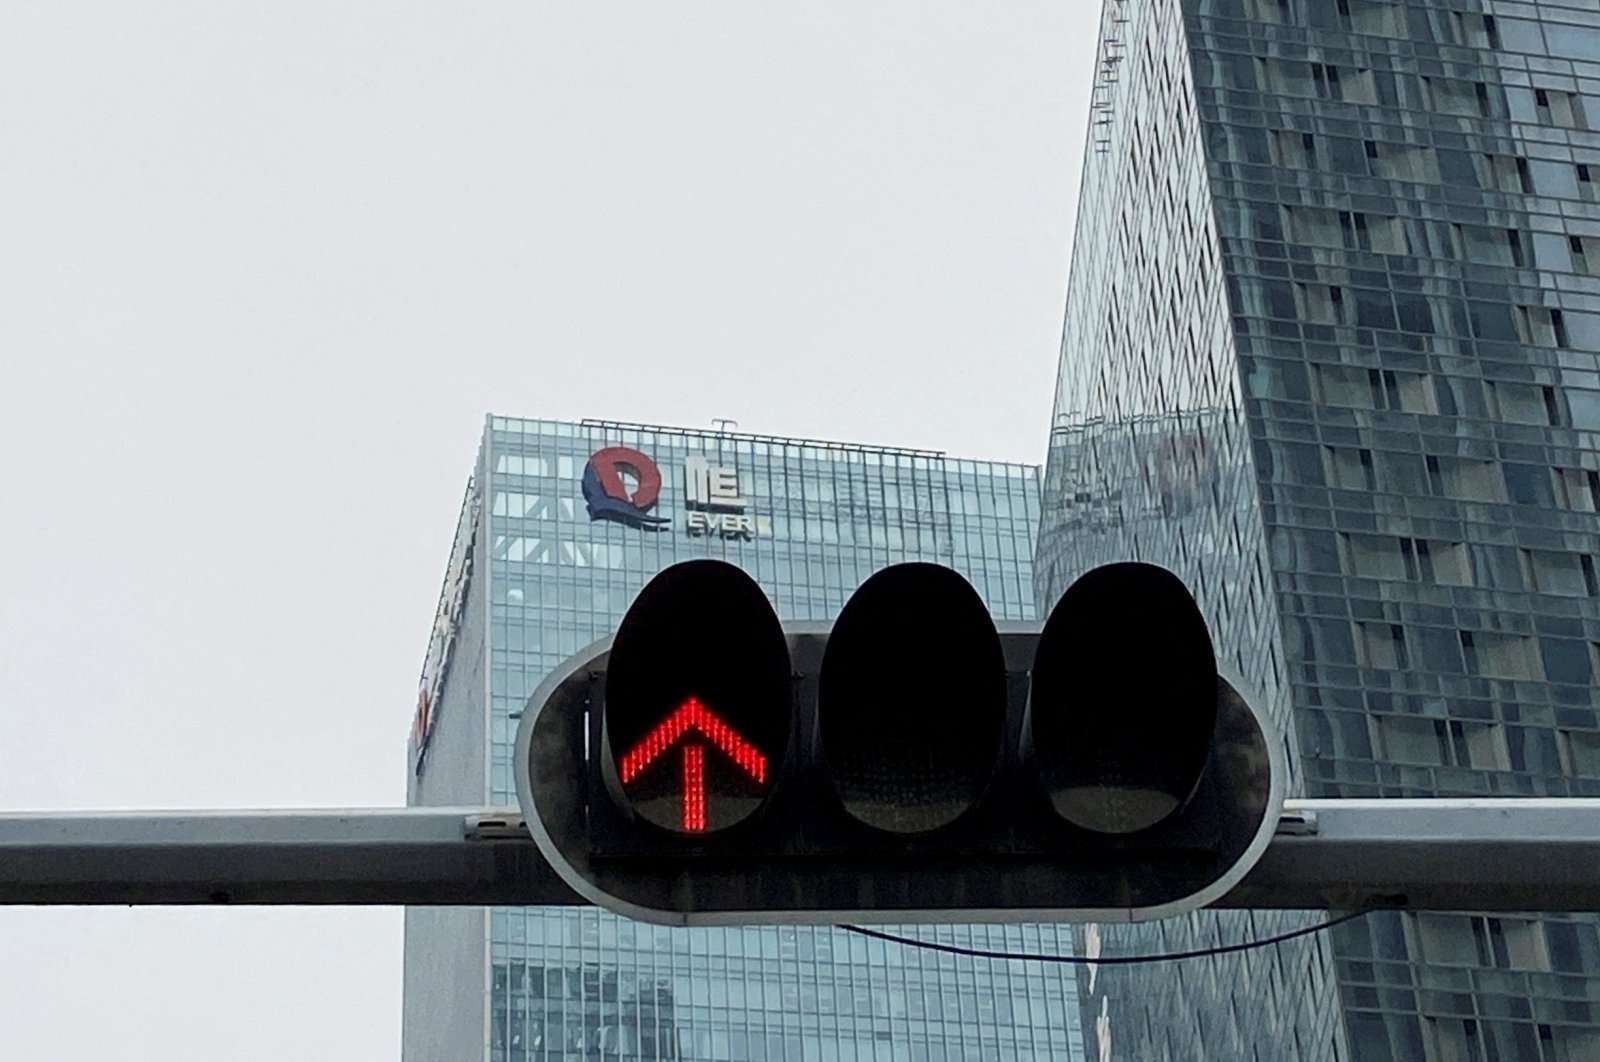 A partially removed company logo of China Evergrande Group is seen on the facade of its headquarters, near a traffic light in Shenzhen, Guangdong province, China, Jan. 10, 2022. (Reuters Photo)